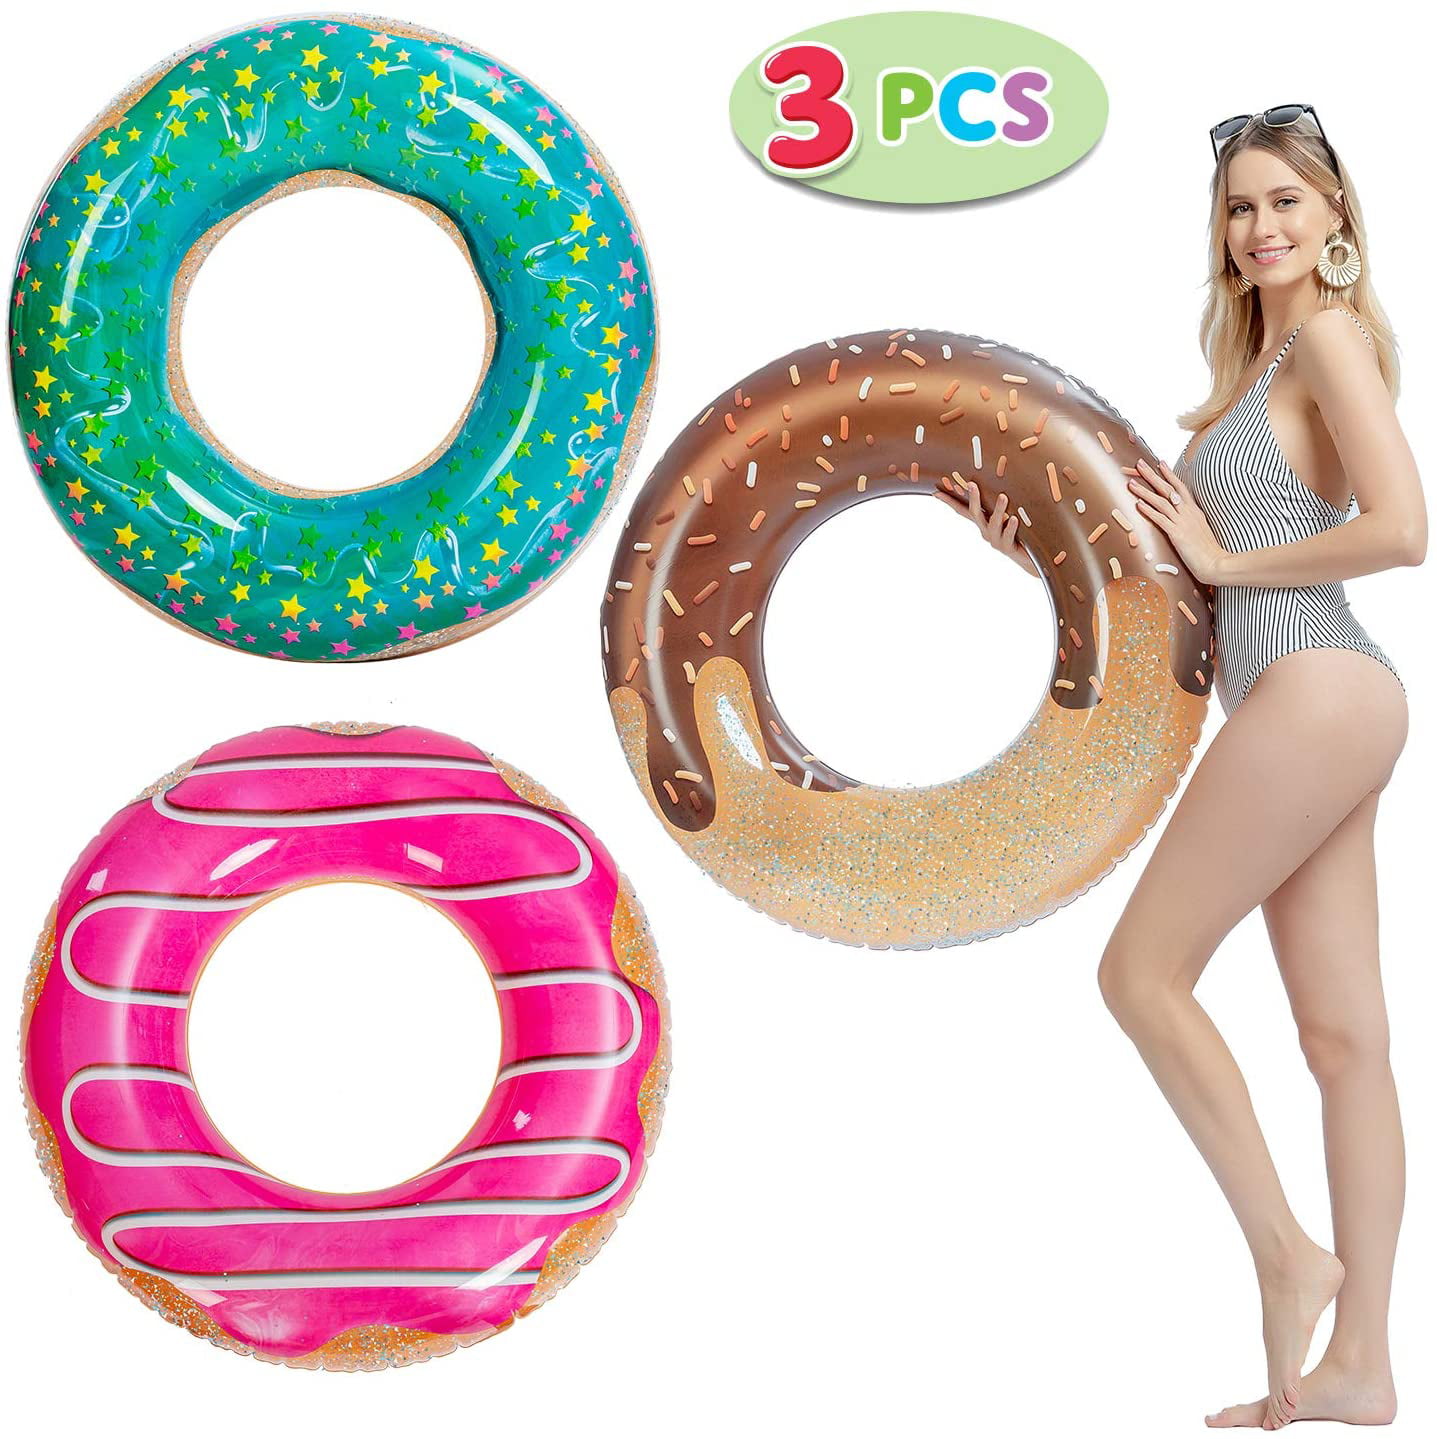 Details about   Inflatable Pool Floats 32.5" 3 Pack Fruit Pool Tubes Pool Toys 